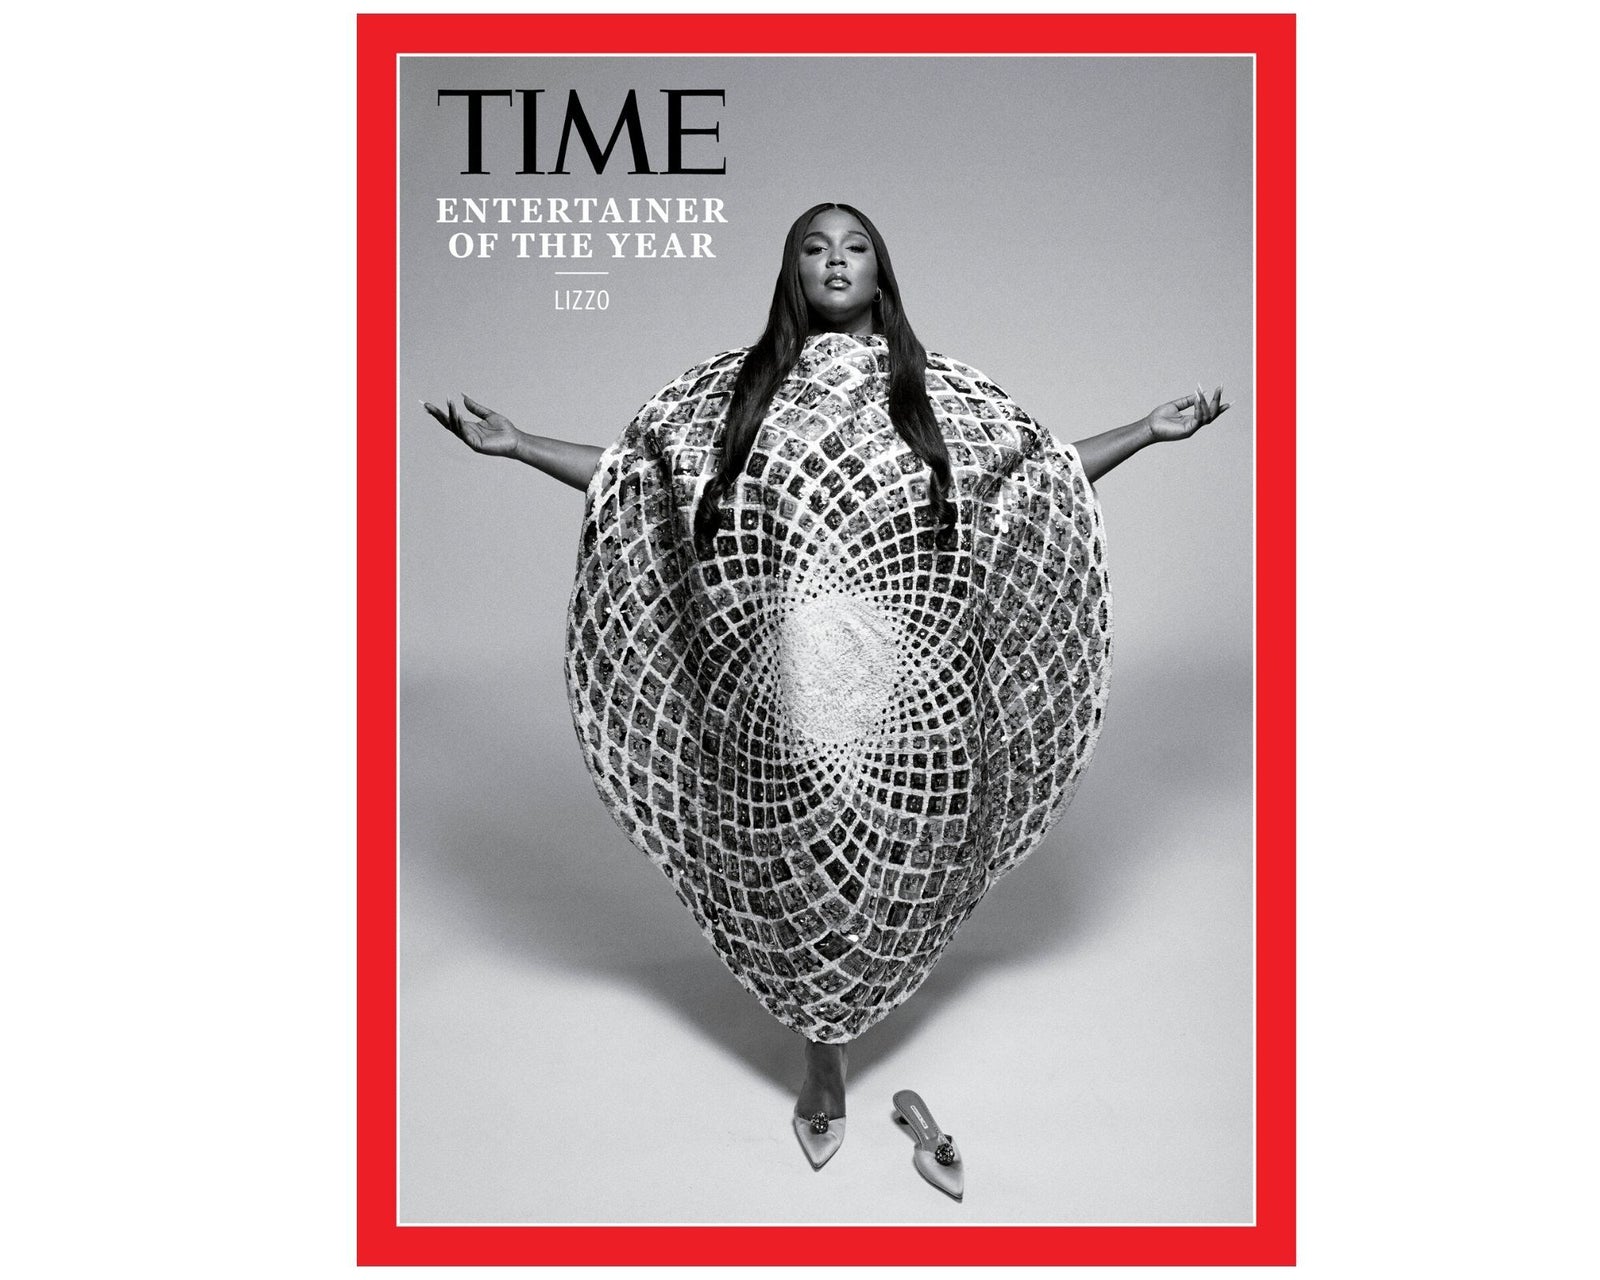 Lizzo Wears ALMASIKA for the cover of TIME